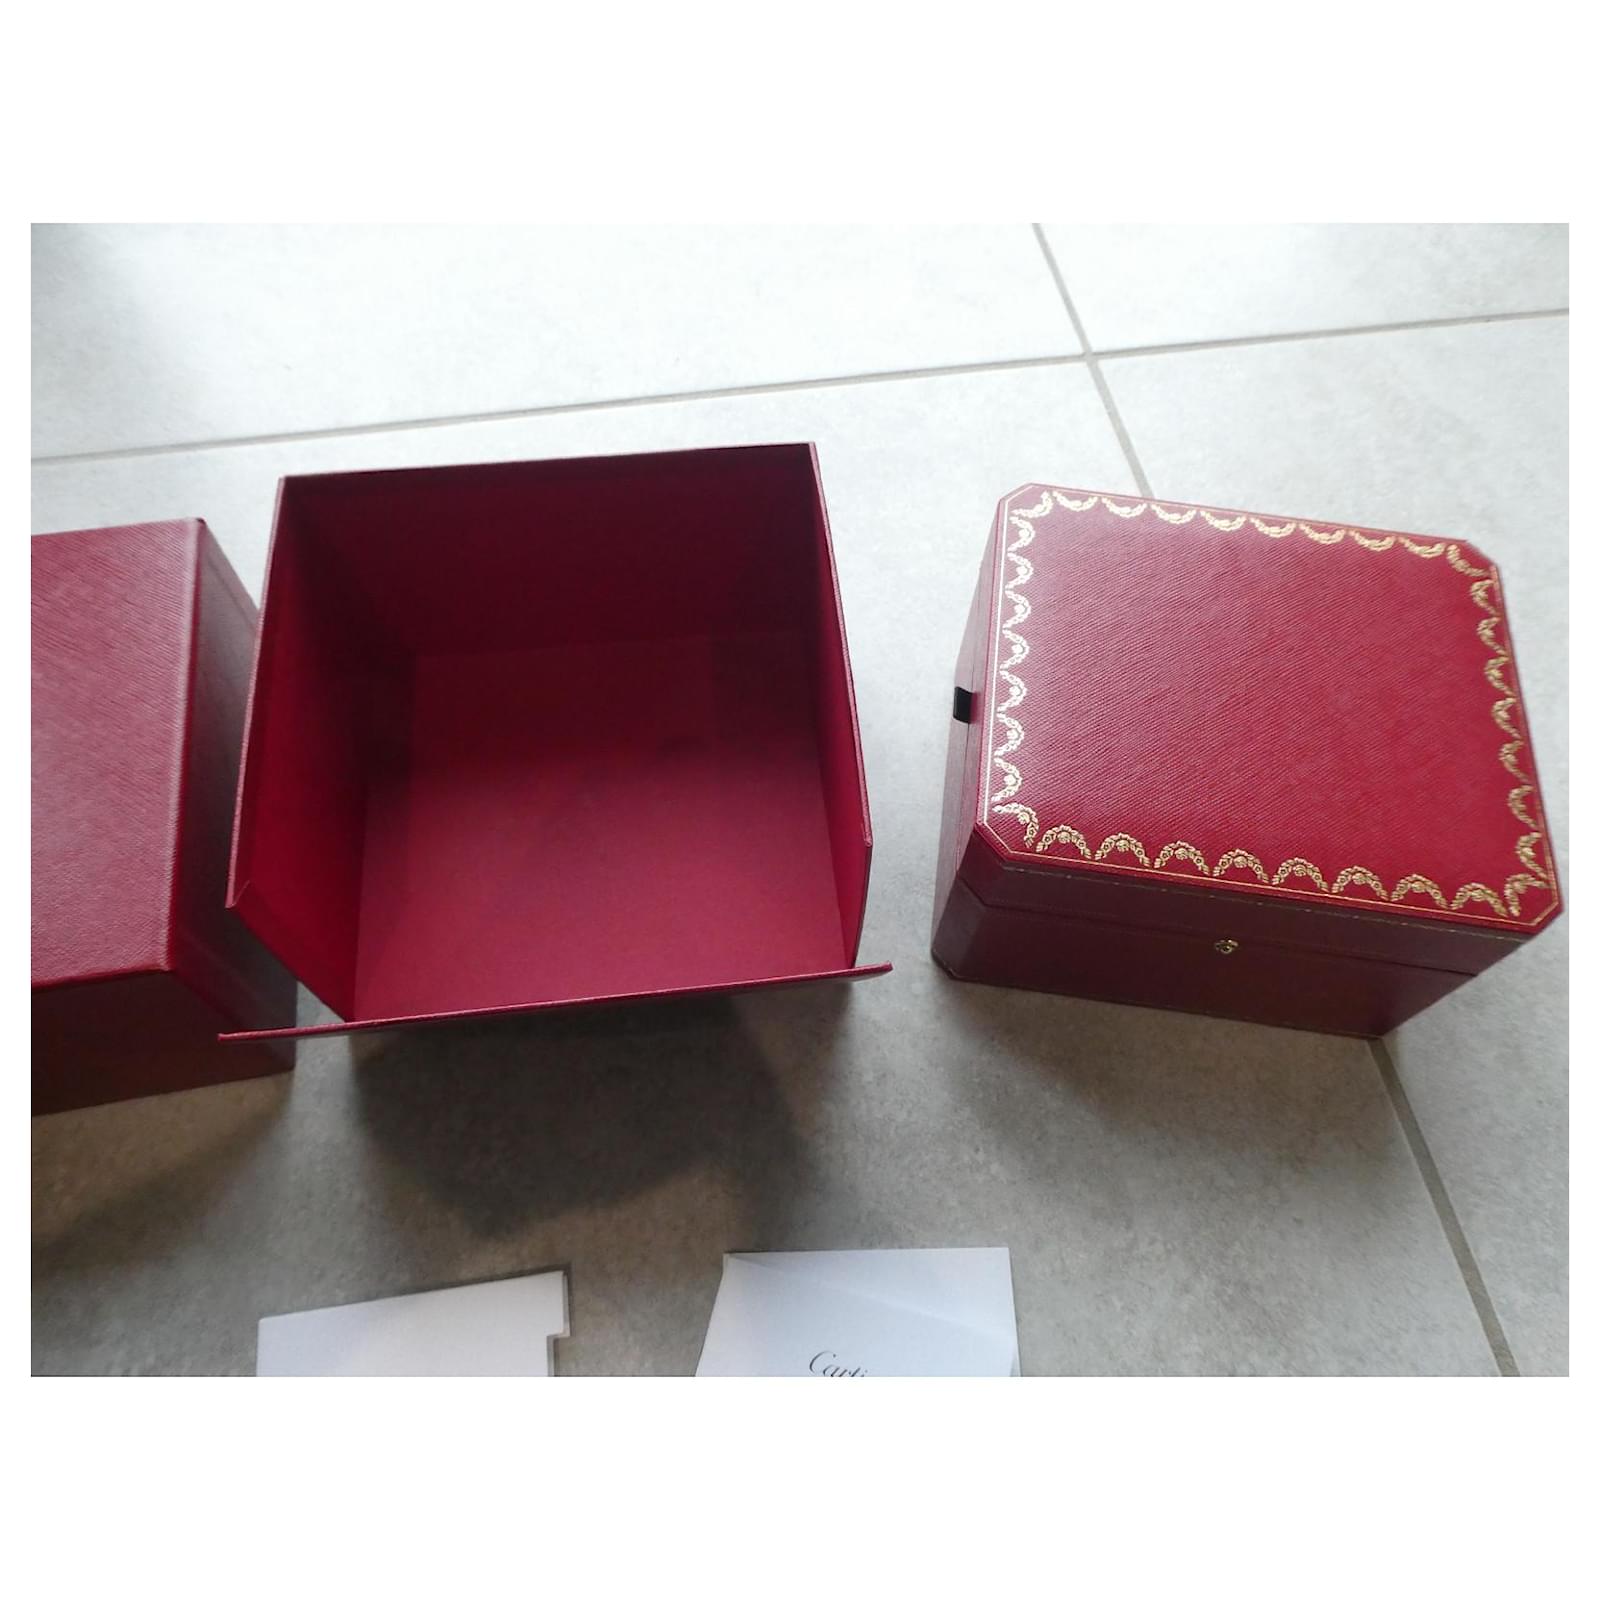 Authentic Cartier Red Gift Bag